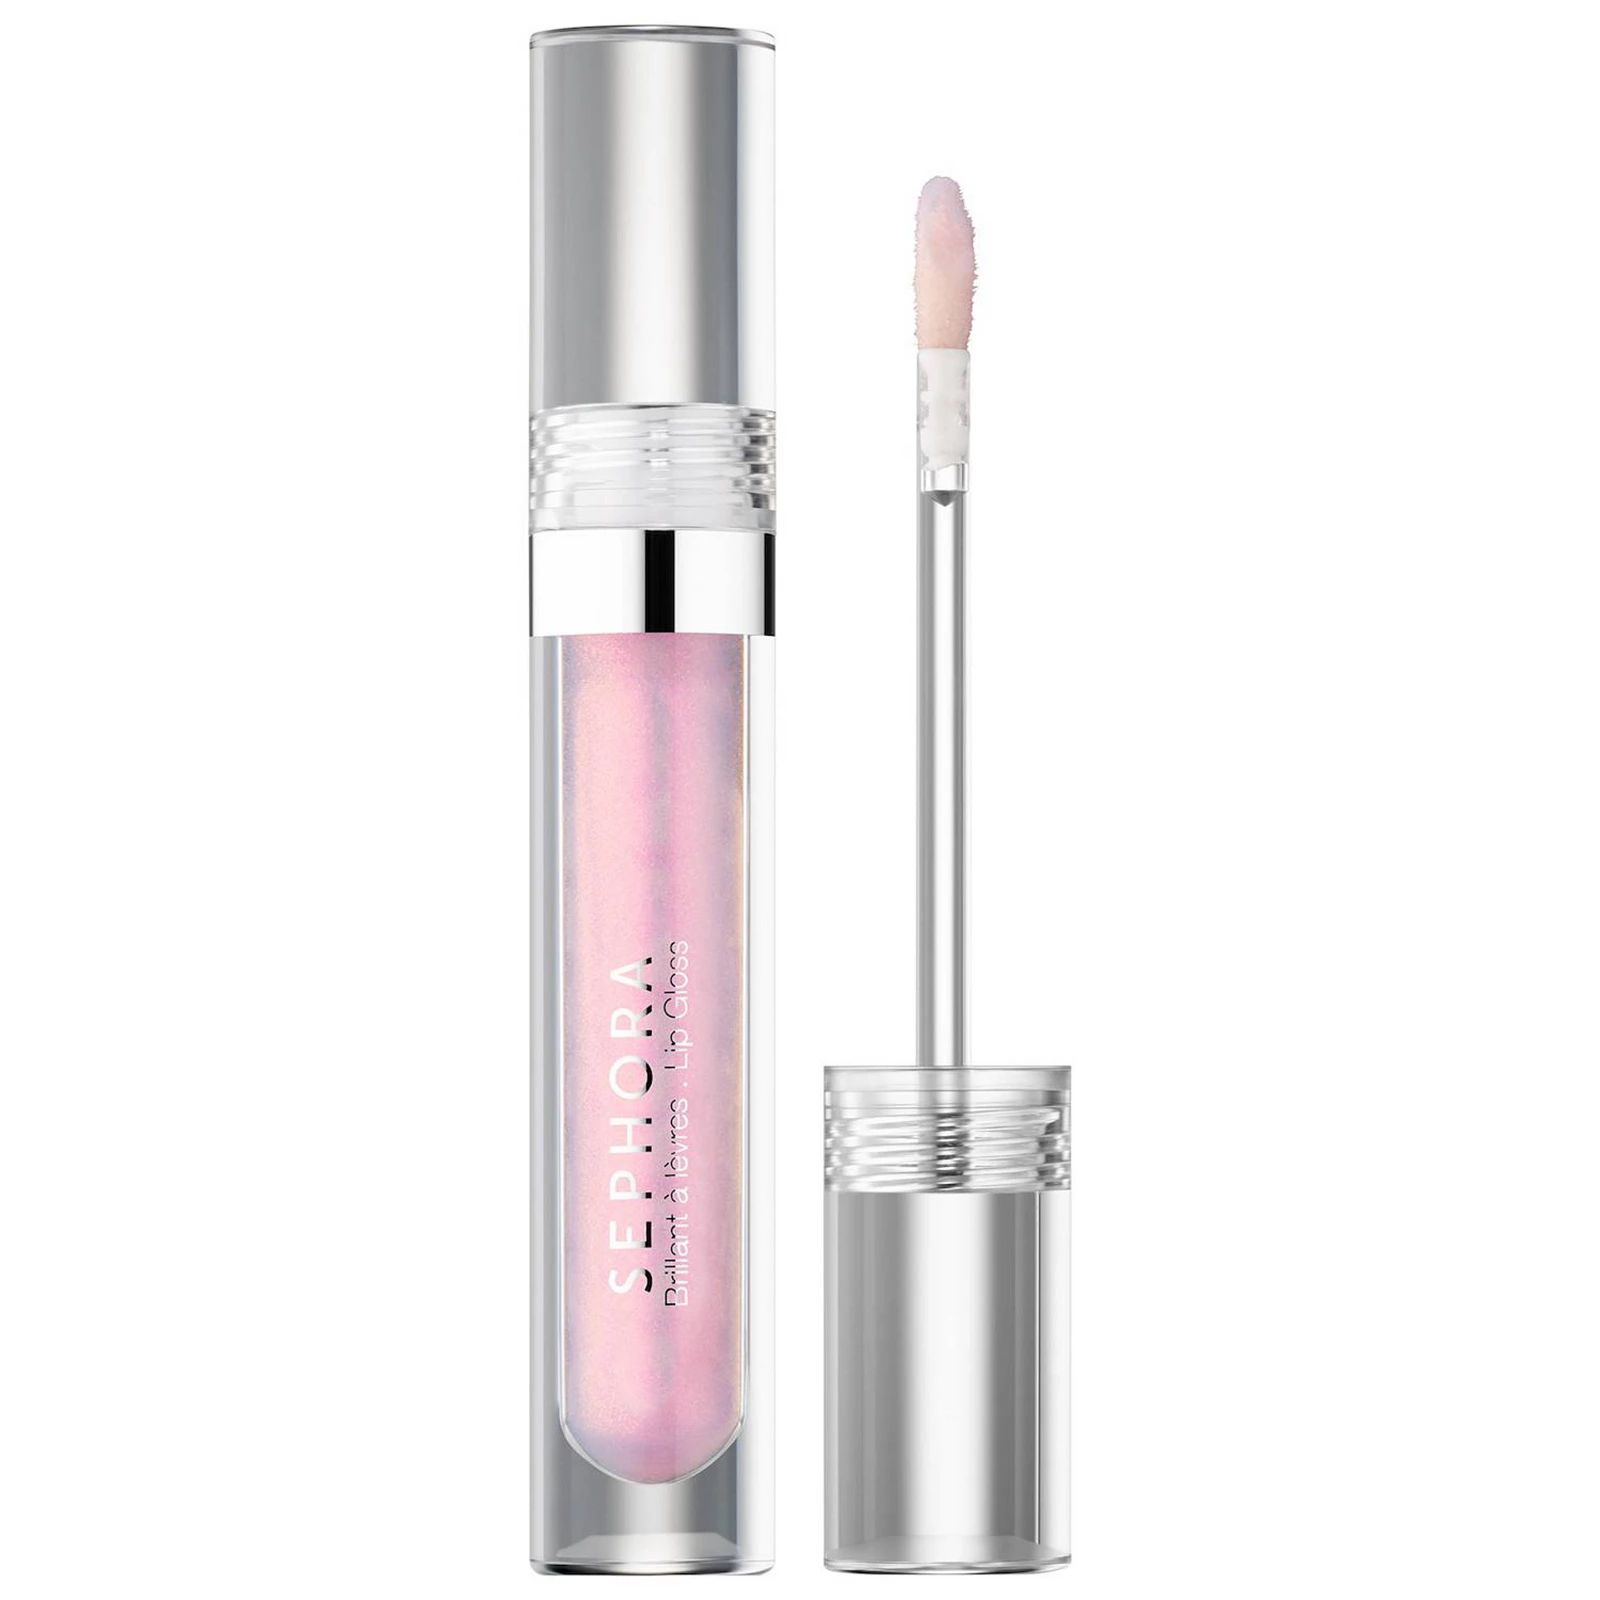 SEPHORA COLLECTION Glossed Lip Gloss | Kohl's